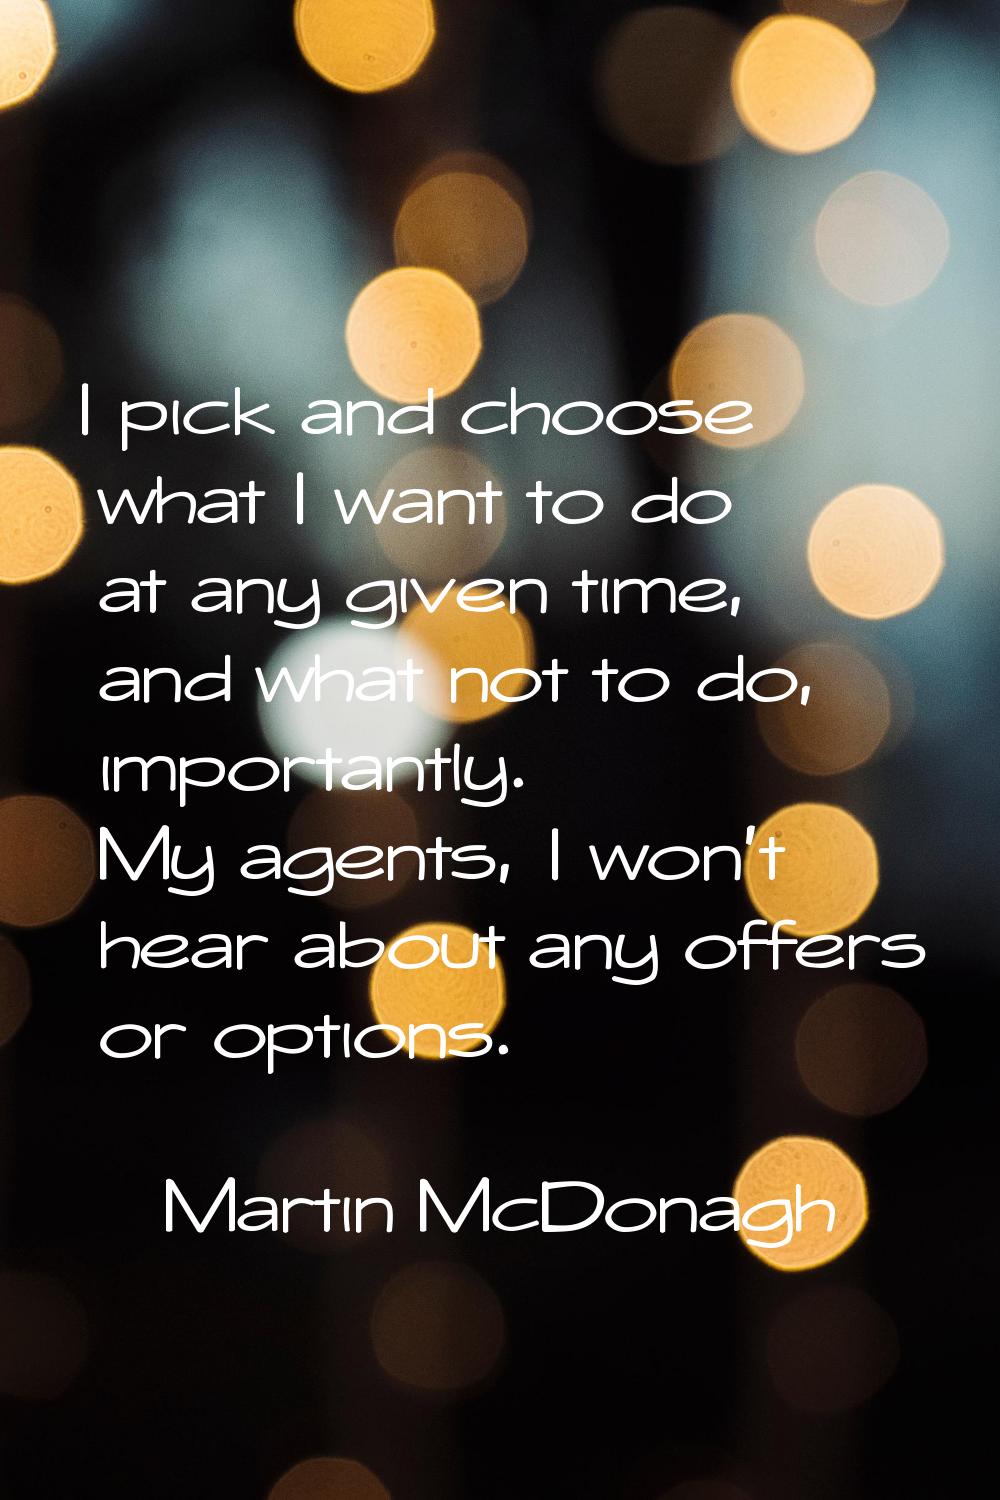 I pick and choose what I want to do at any given time, and what not to do, importantly. My agents, 